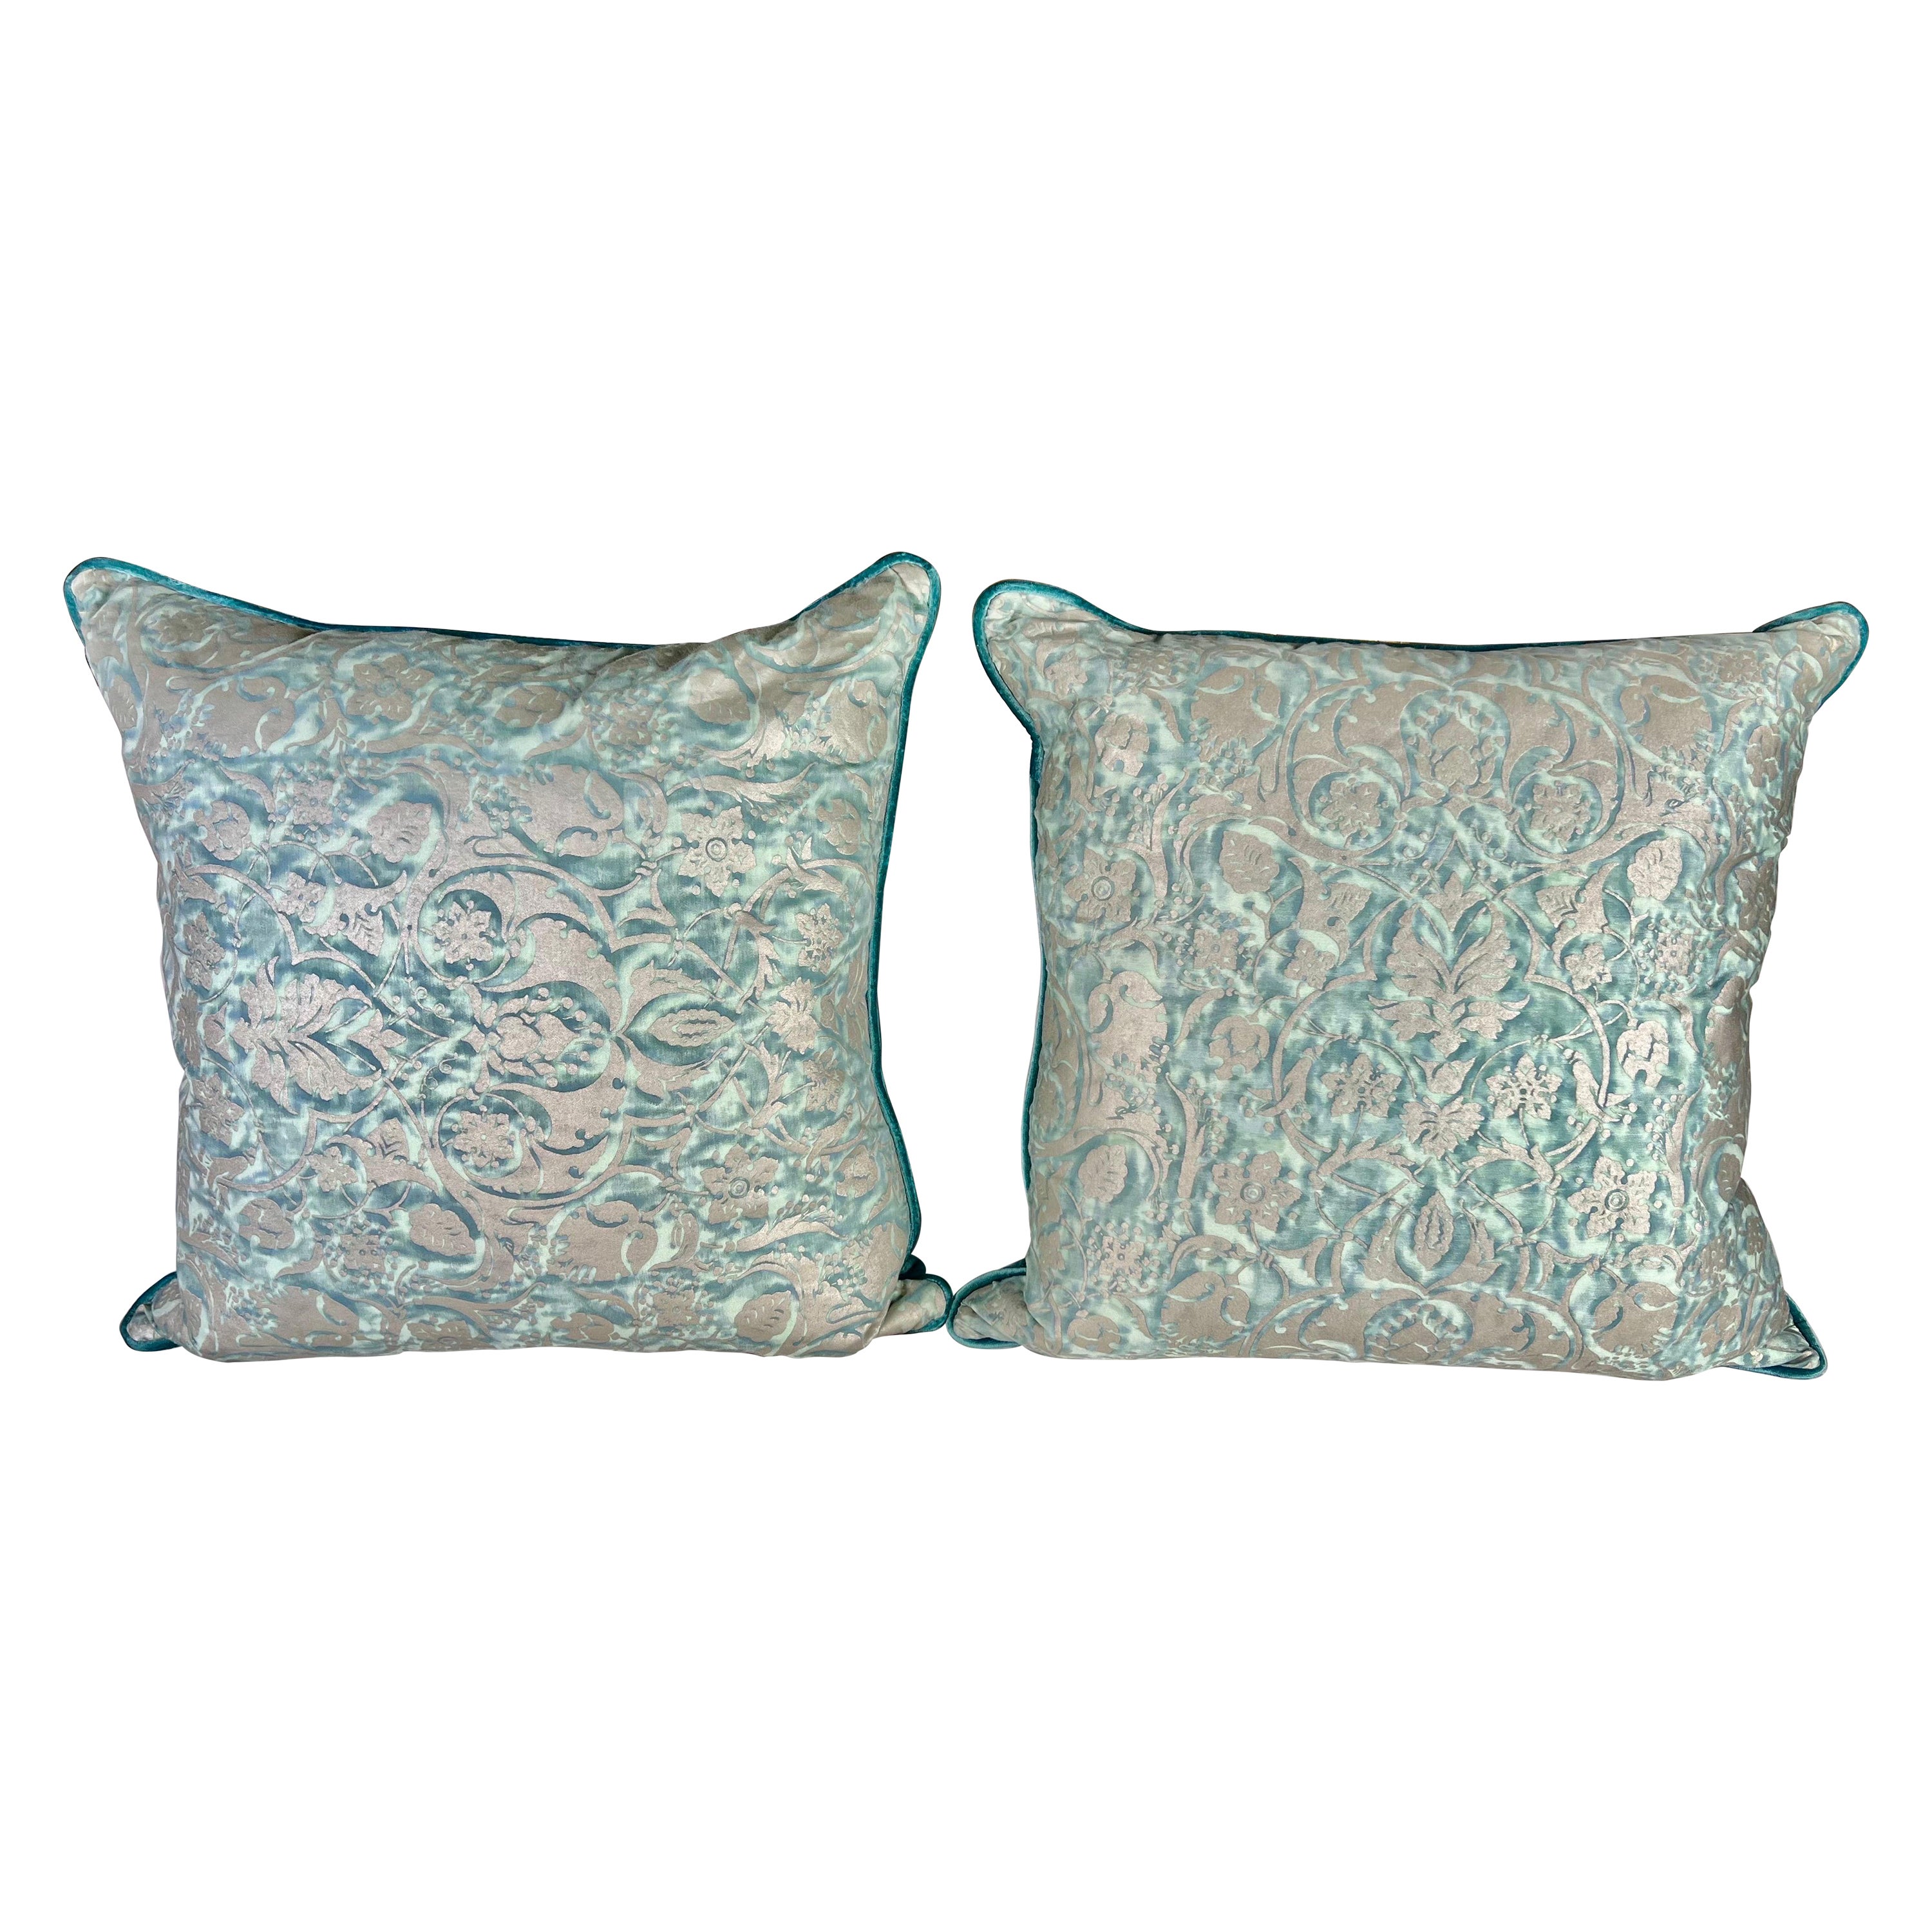 Pair of Custom Aqua & Gold Mariano Fortuny Pillows For Sale